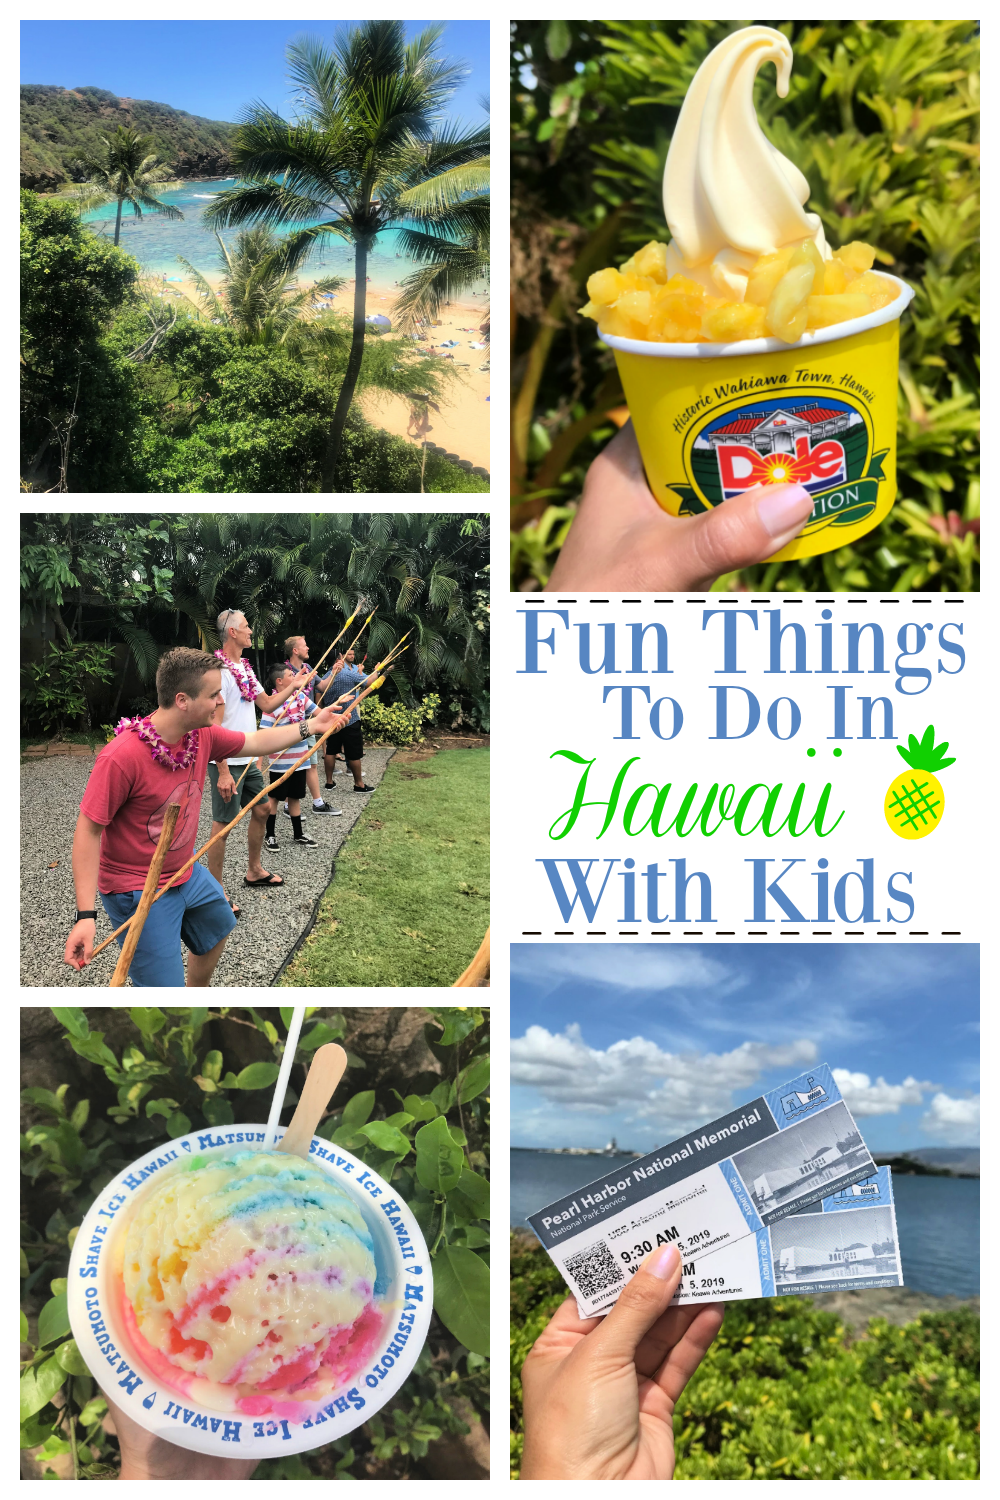 Fun Things to do in Oahu With Kids. We have lots of fun ideas to make your next Hawaiian vacations amazing! Lots of ideas for the whole family. #hawaii #Hawaiianvacation #vacations #travel